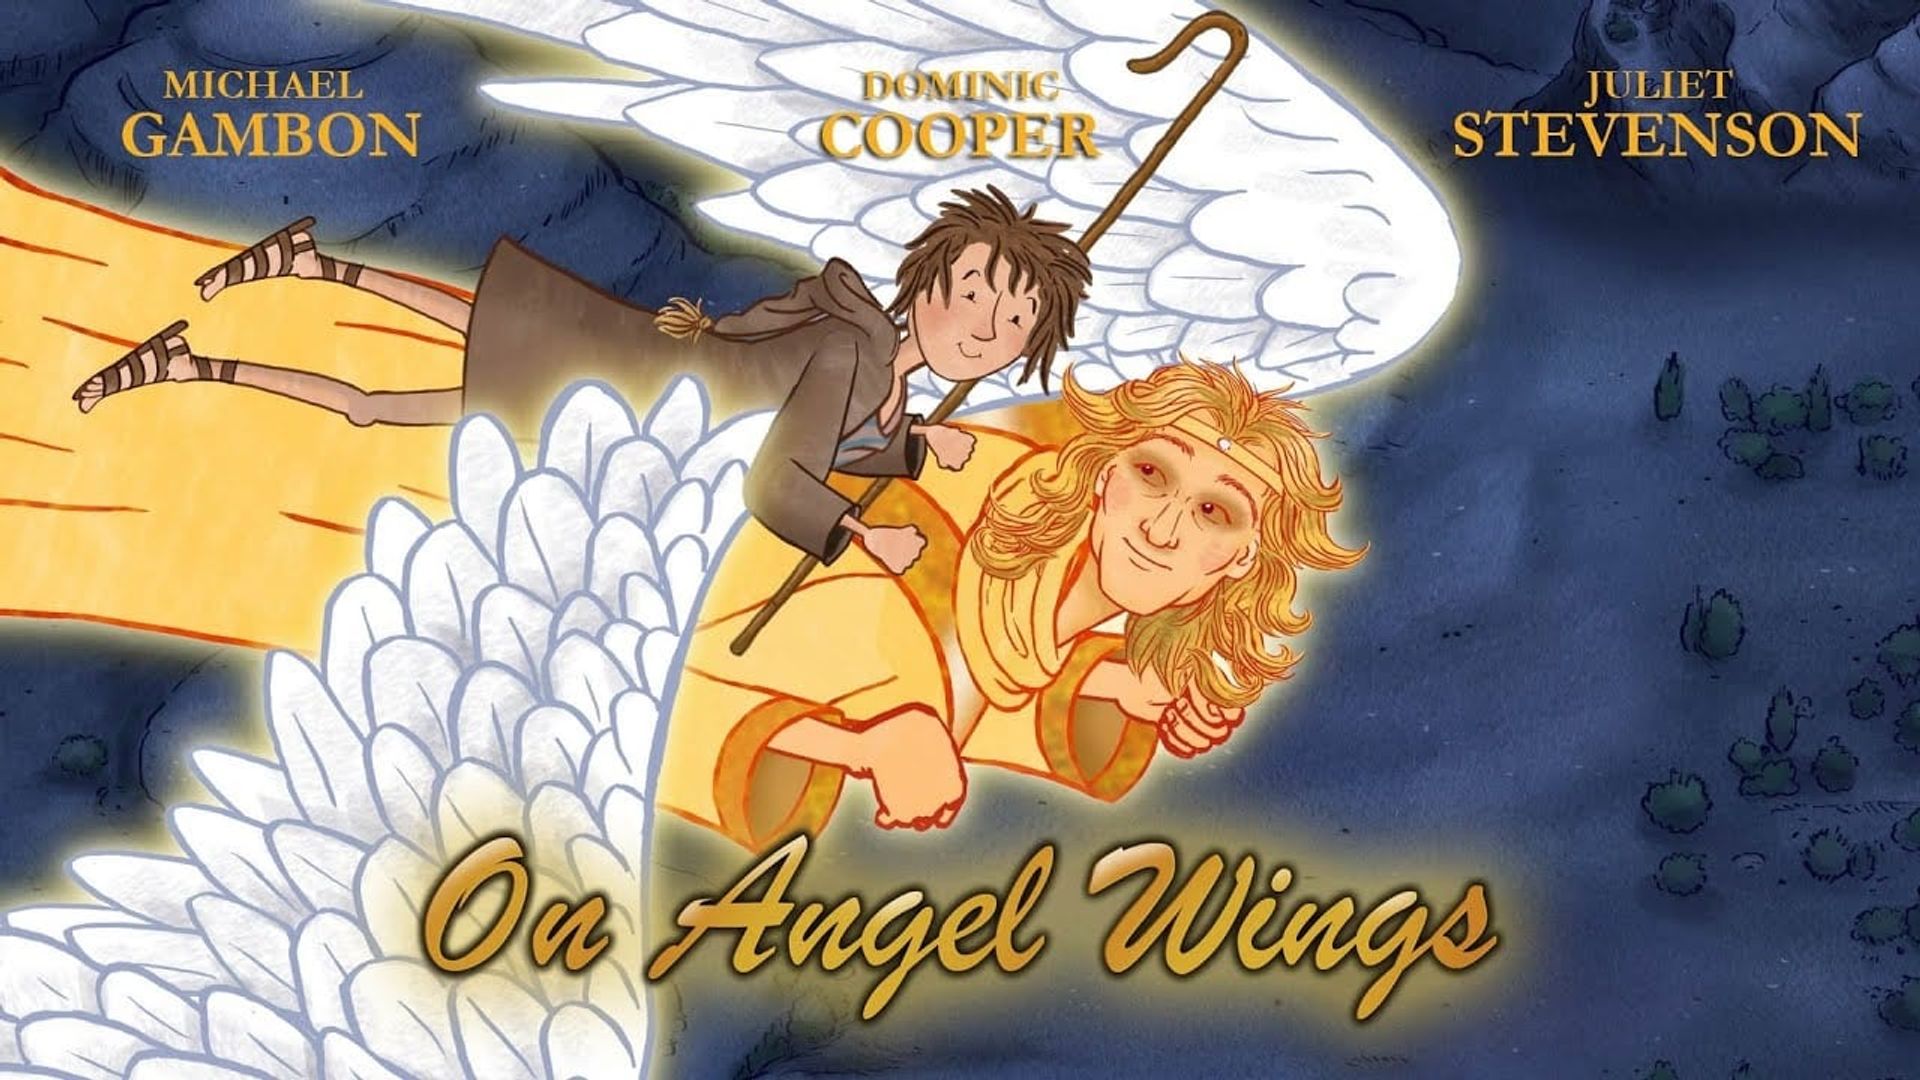 On Angel Wings background